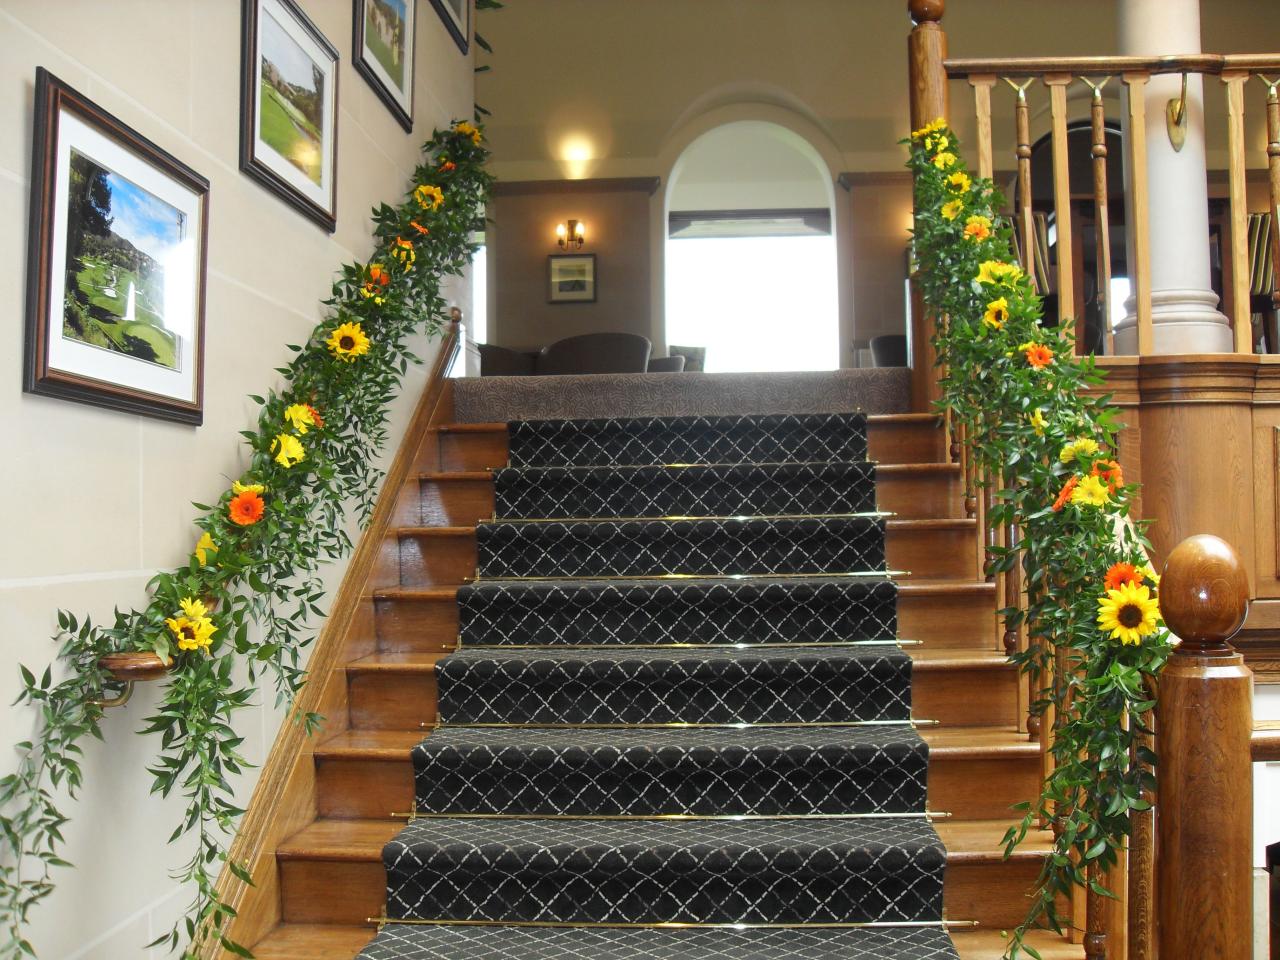 Wedding decorations staircase decoration flower stairs decor stair flowers garland floral arrangements reception romantic table flores se visit staircases banisters